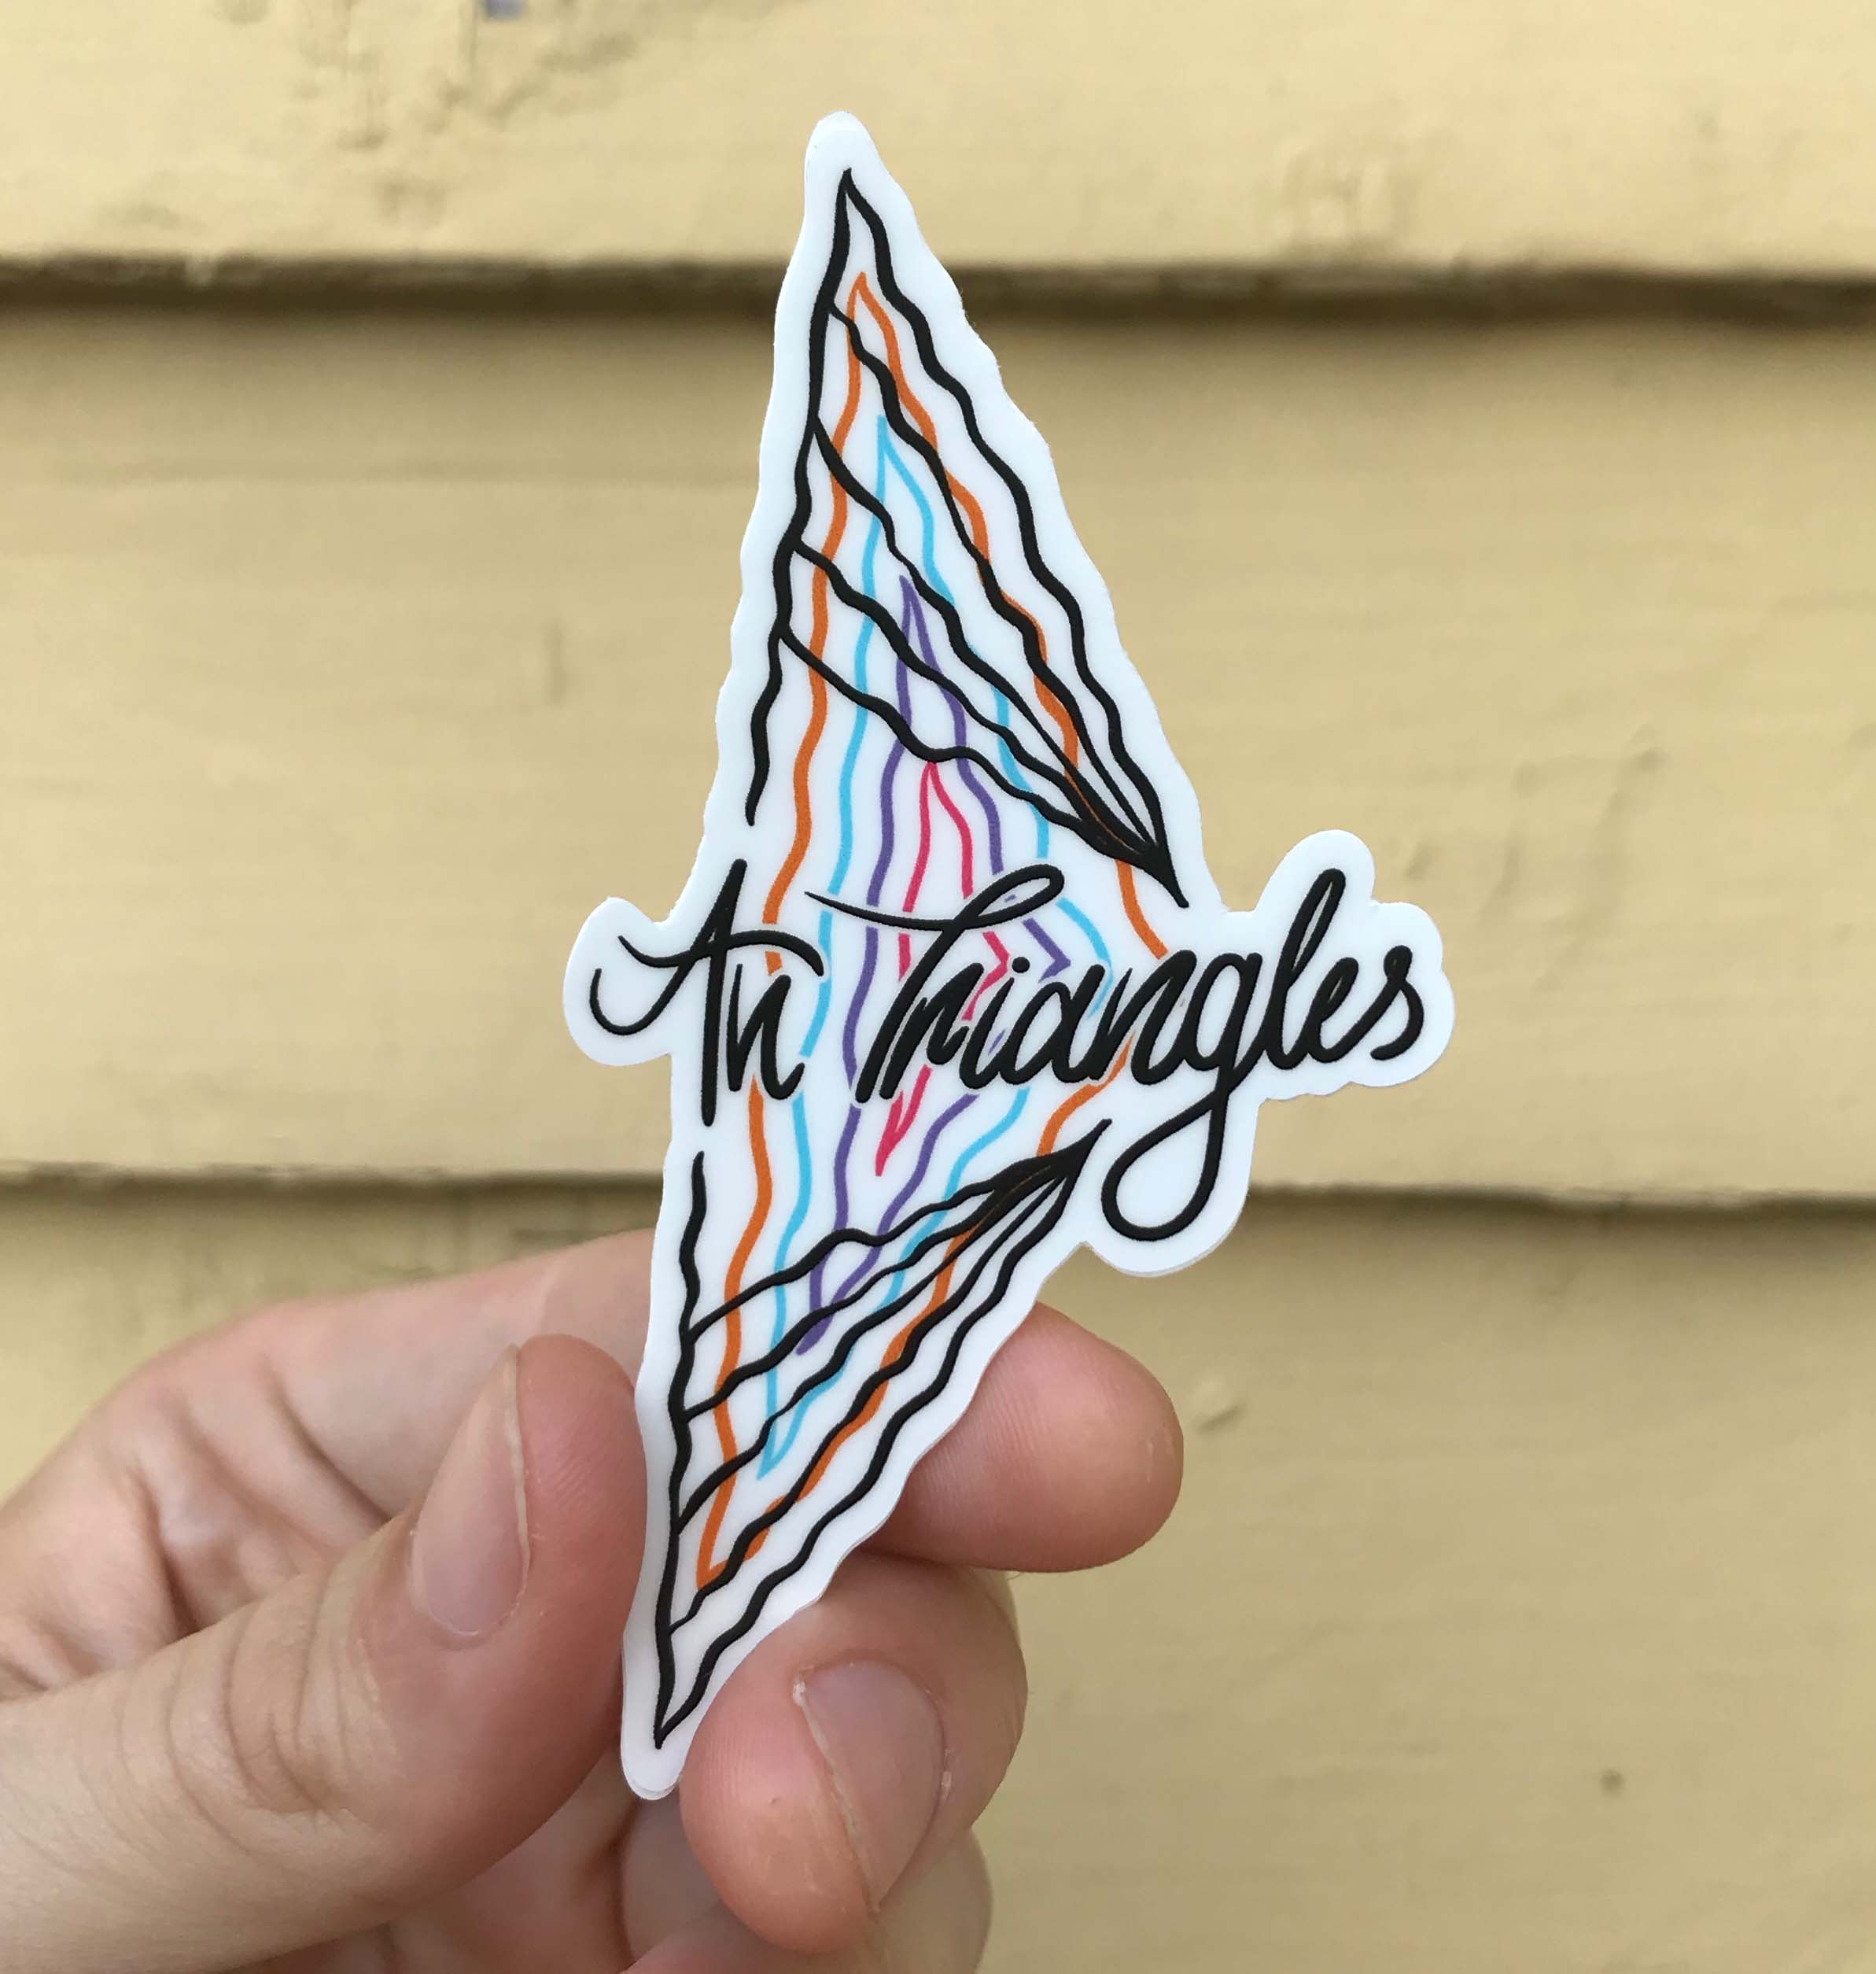 An Triangles sticker held in hand before a yellow background